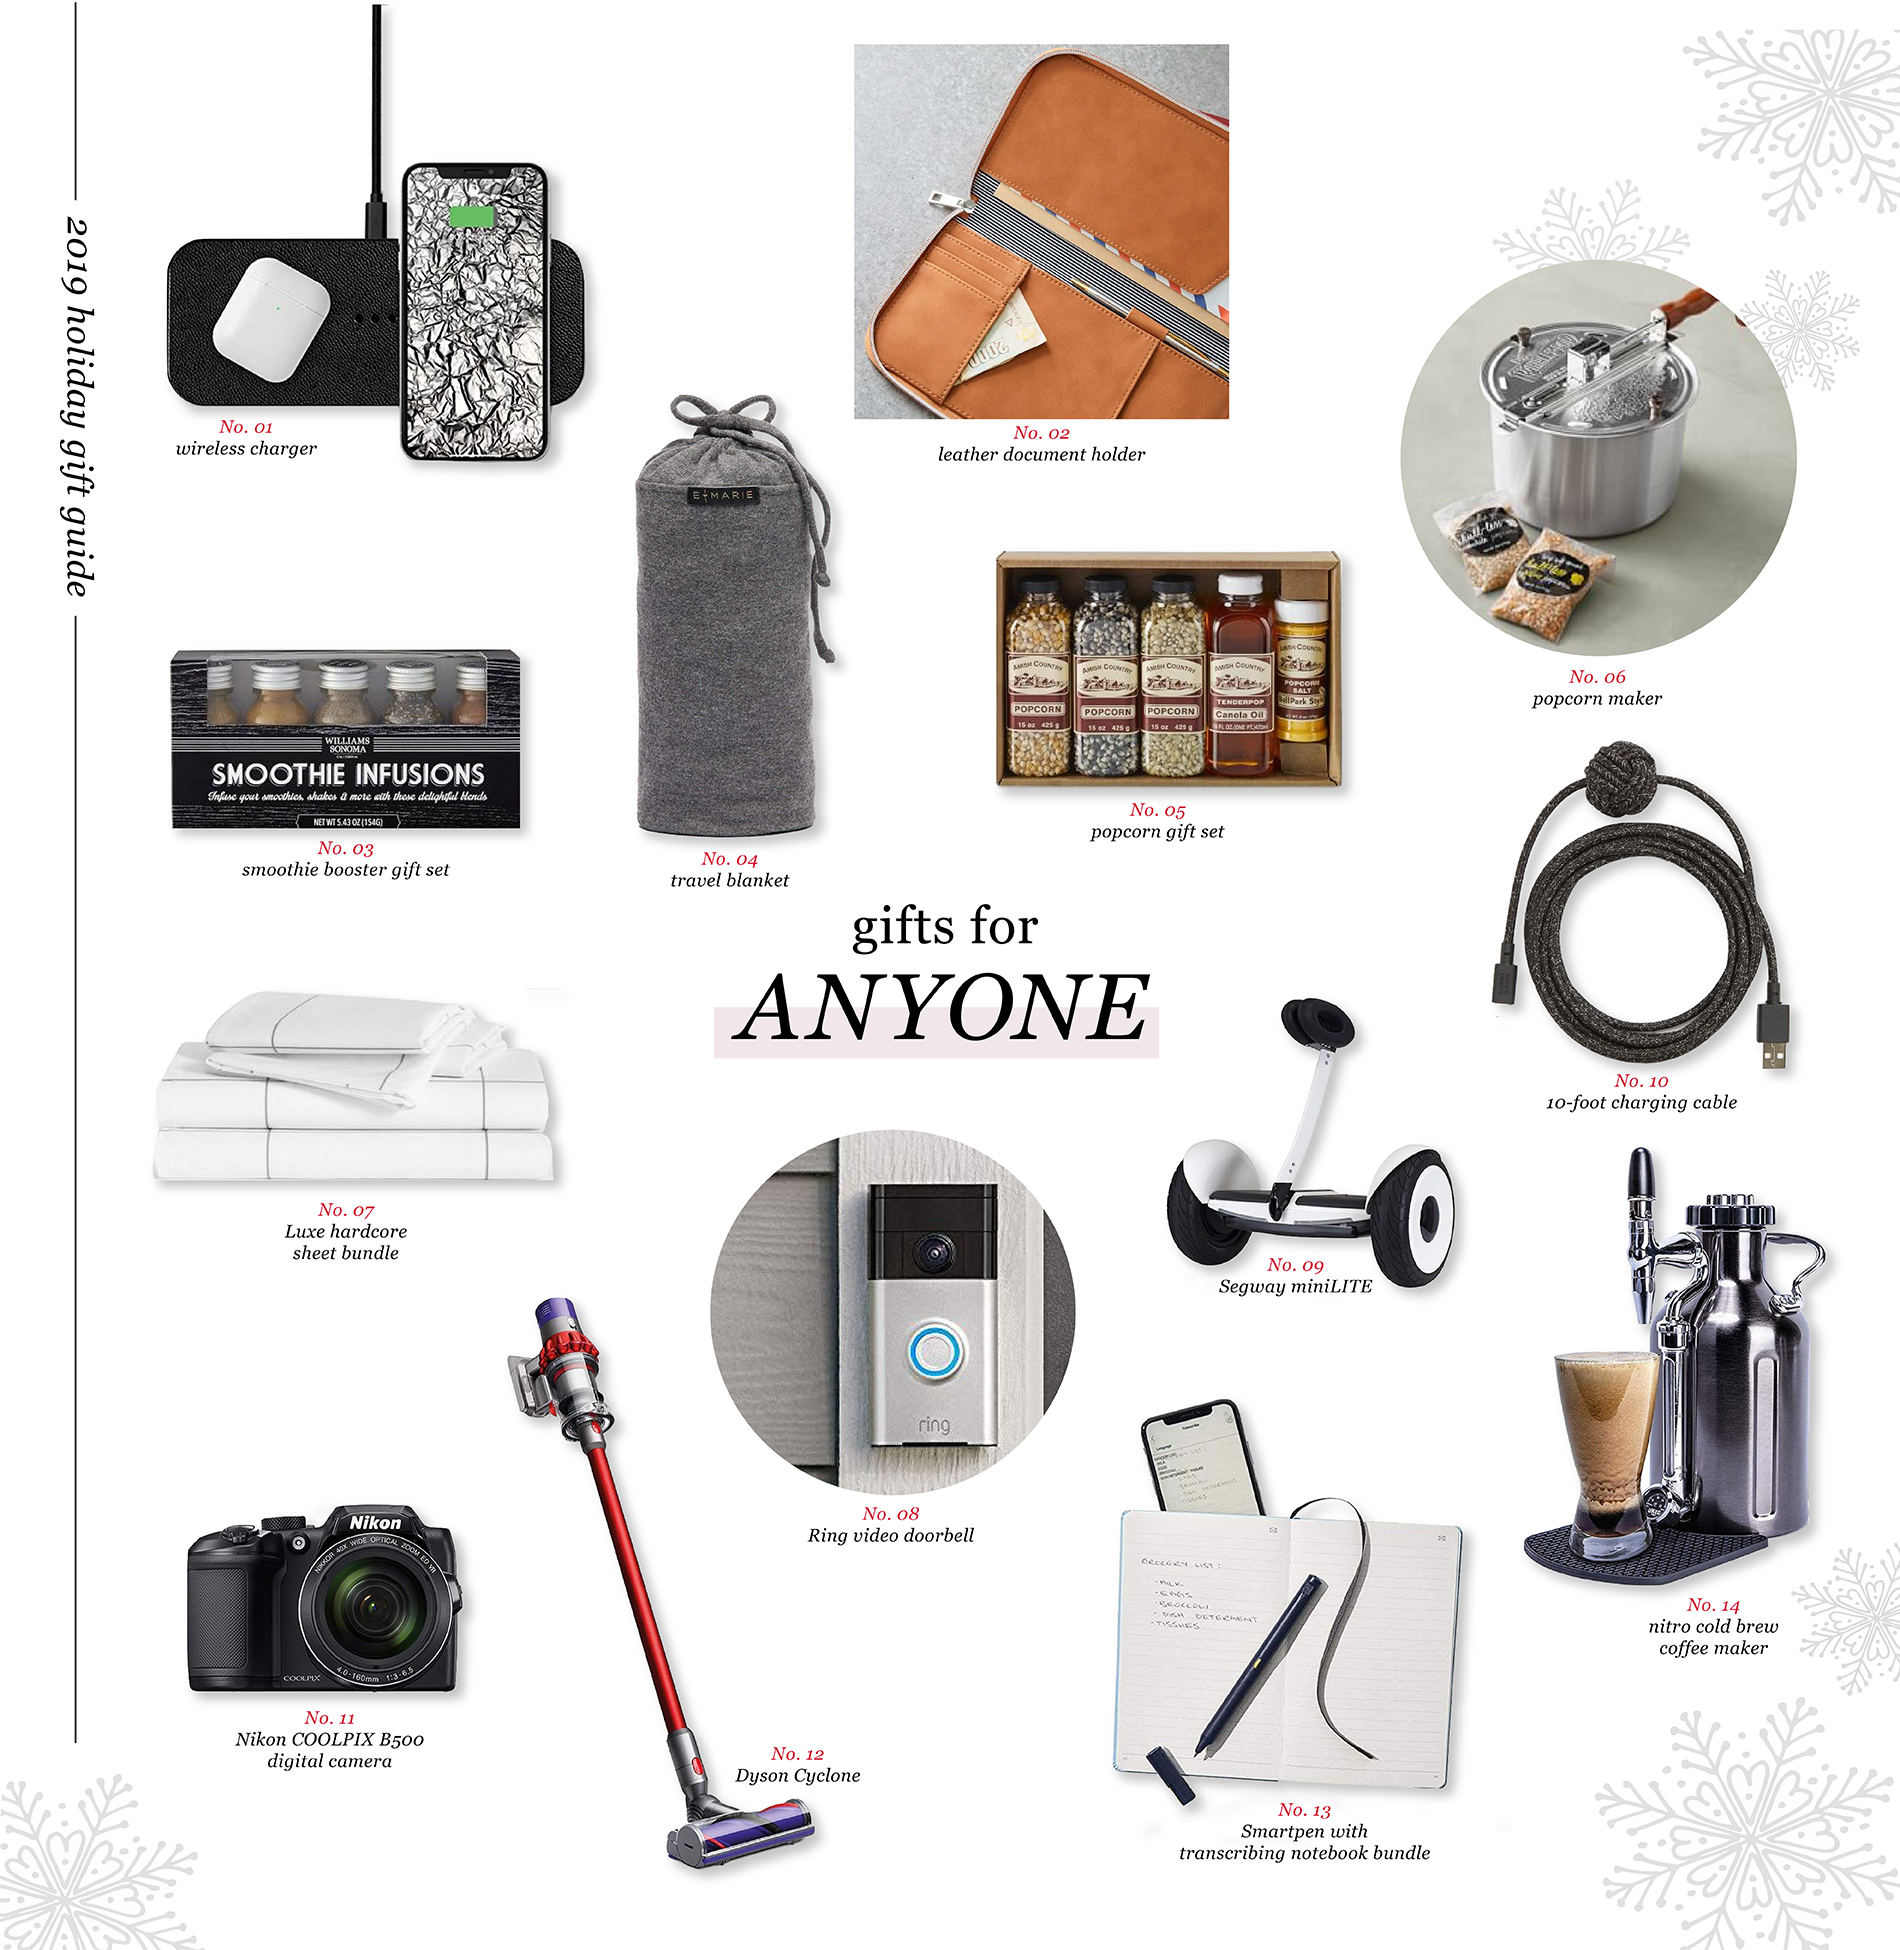 Gift Guide for Anyone - The Small Things Blog